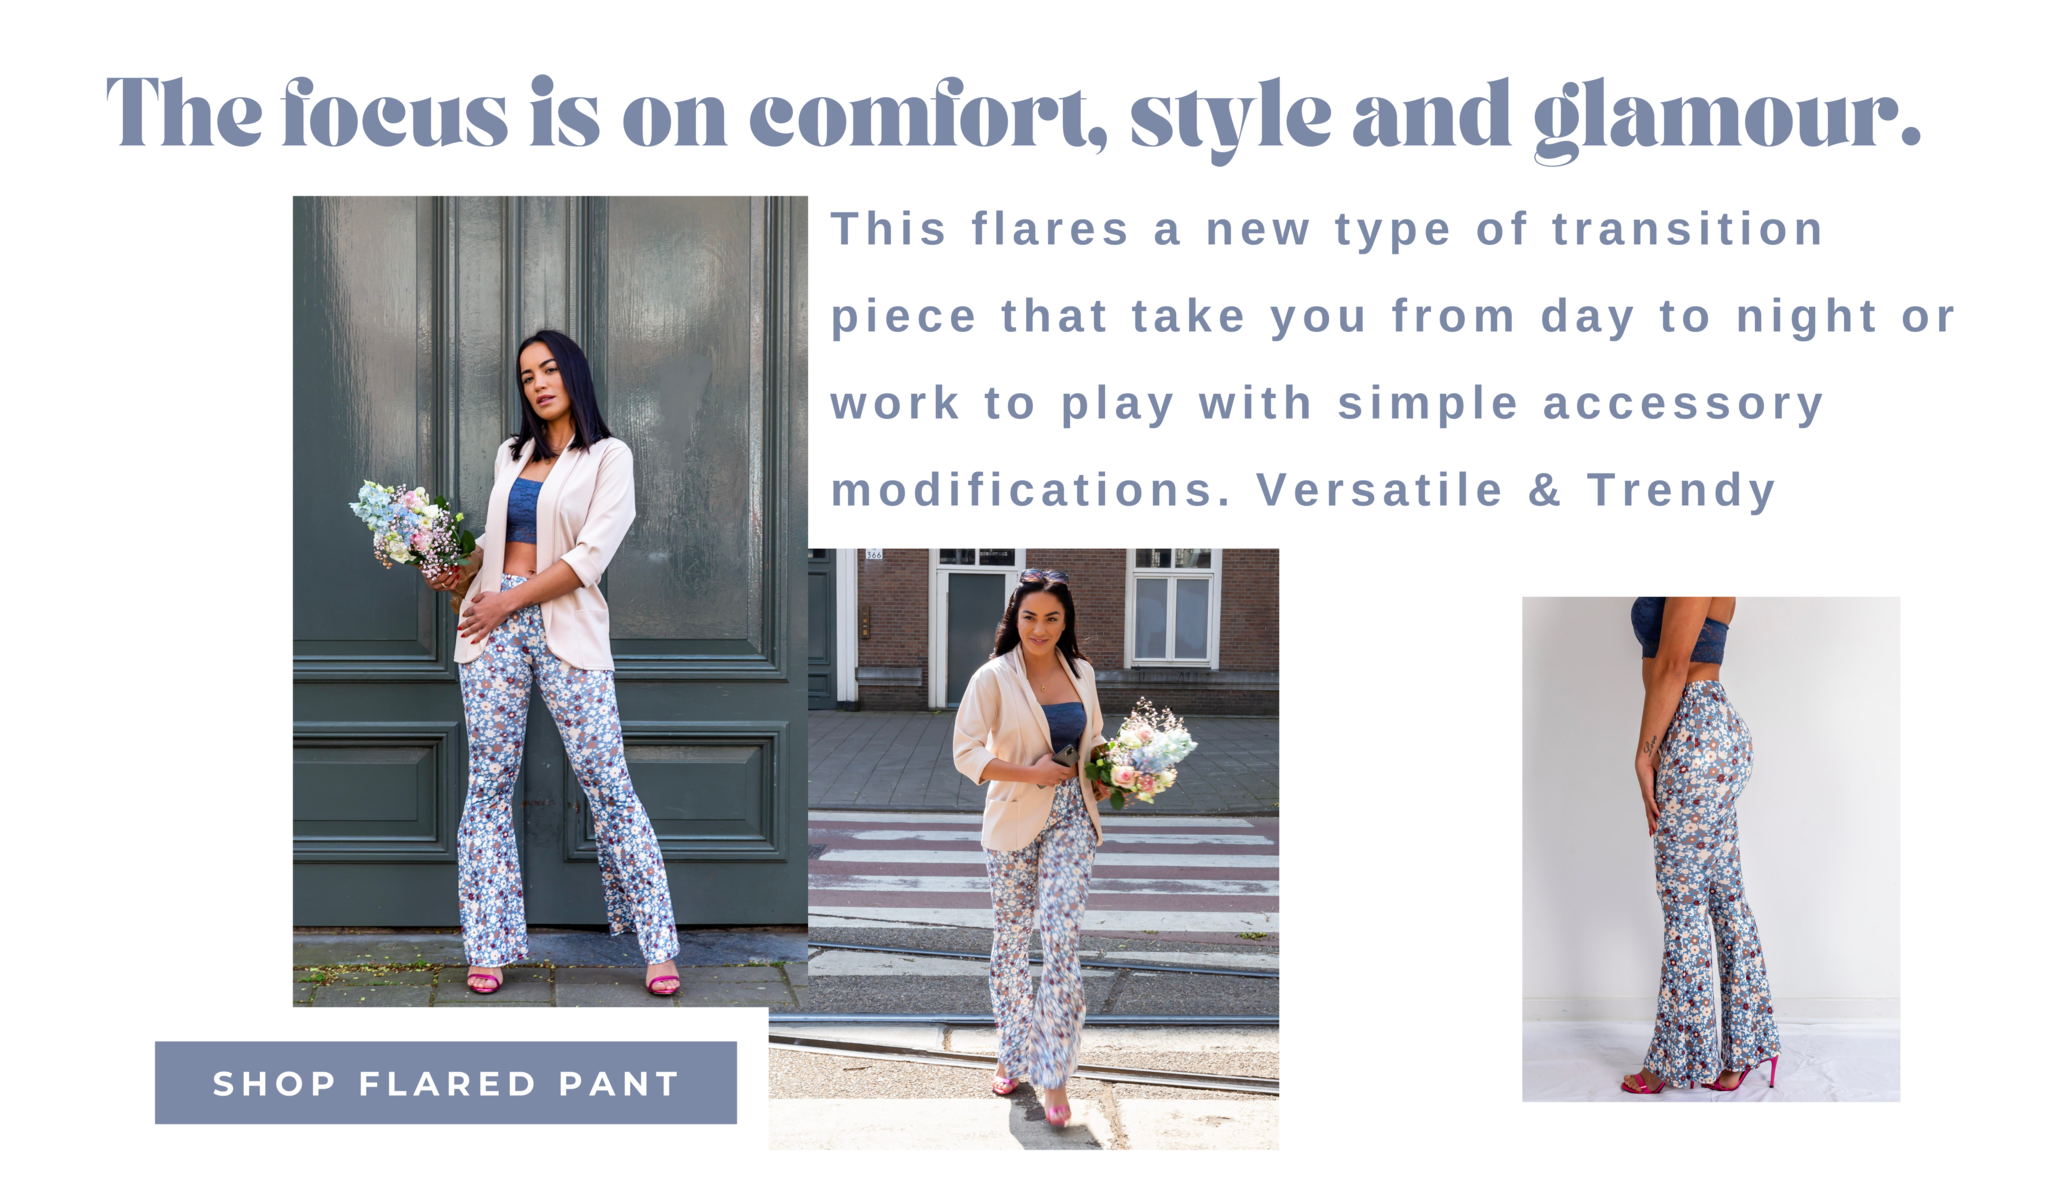 This flares a new type of transition piece that take you from day to night or work to play with simple accessory modifications. Versatile & Trendy